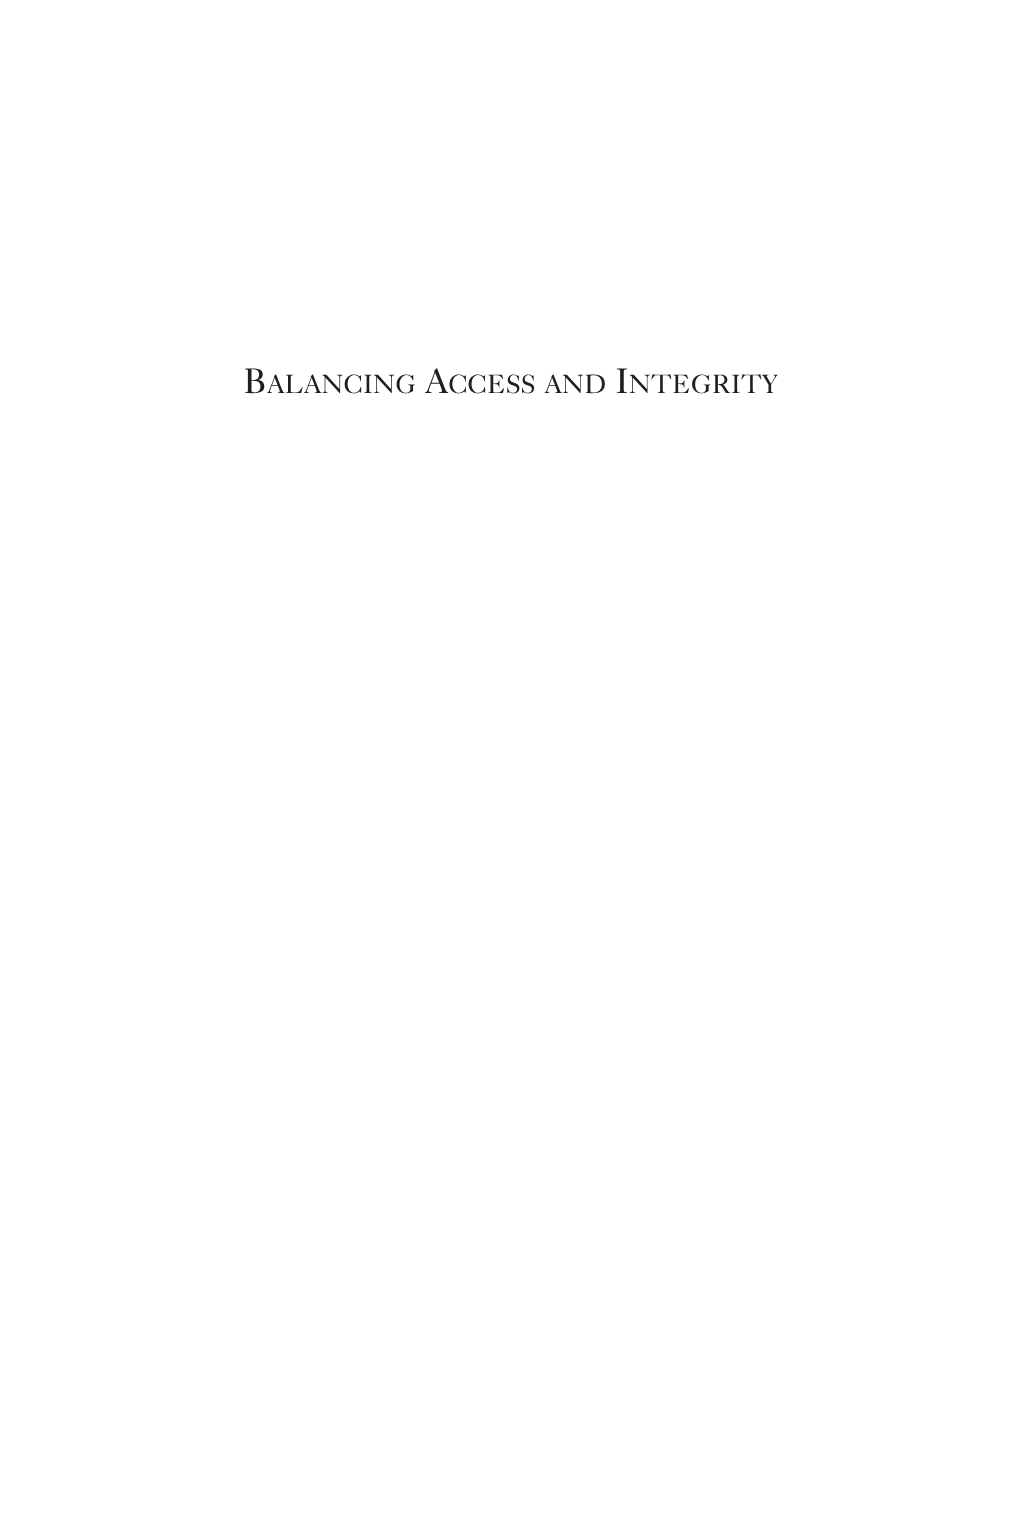 The Century Foundation – Balancing Access and Integrity – July 2005